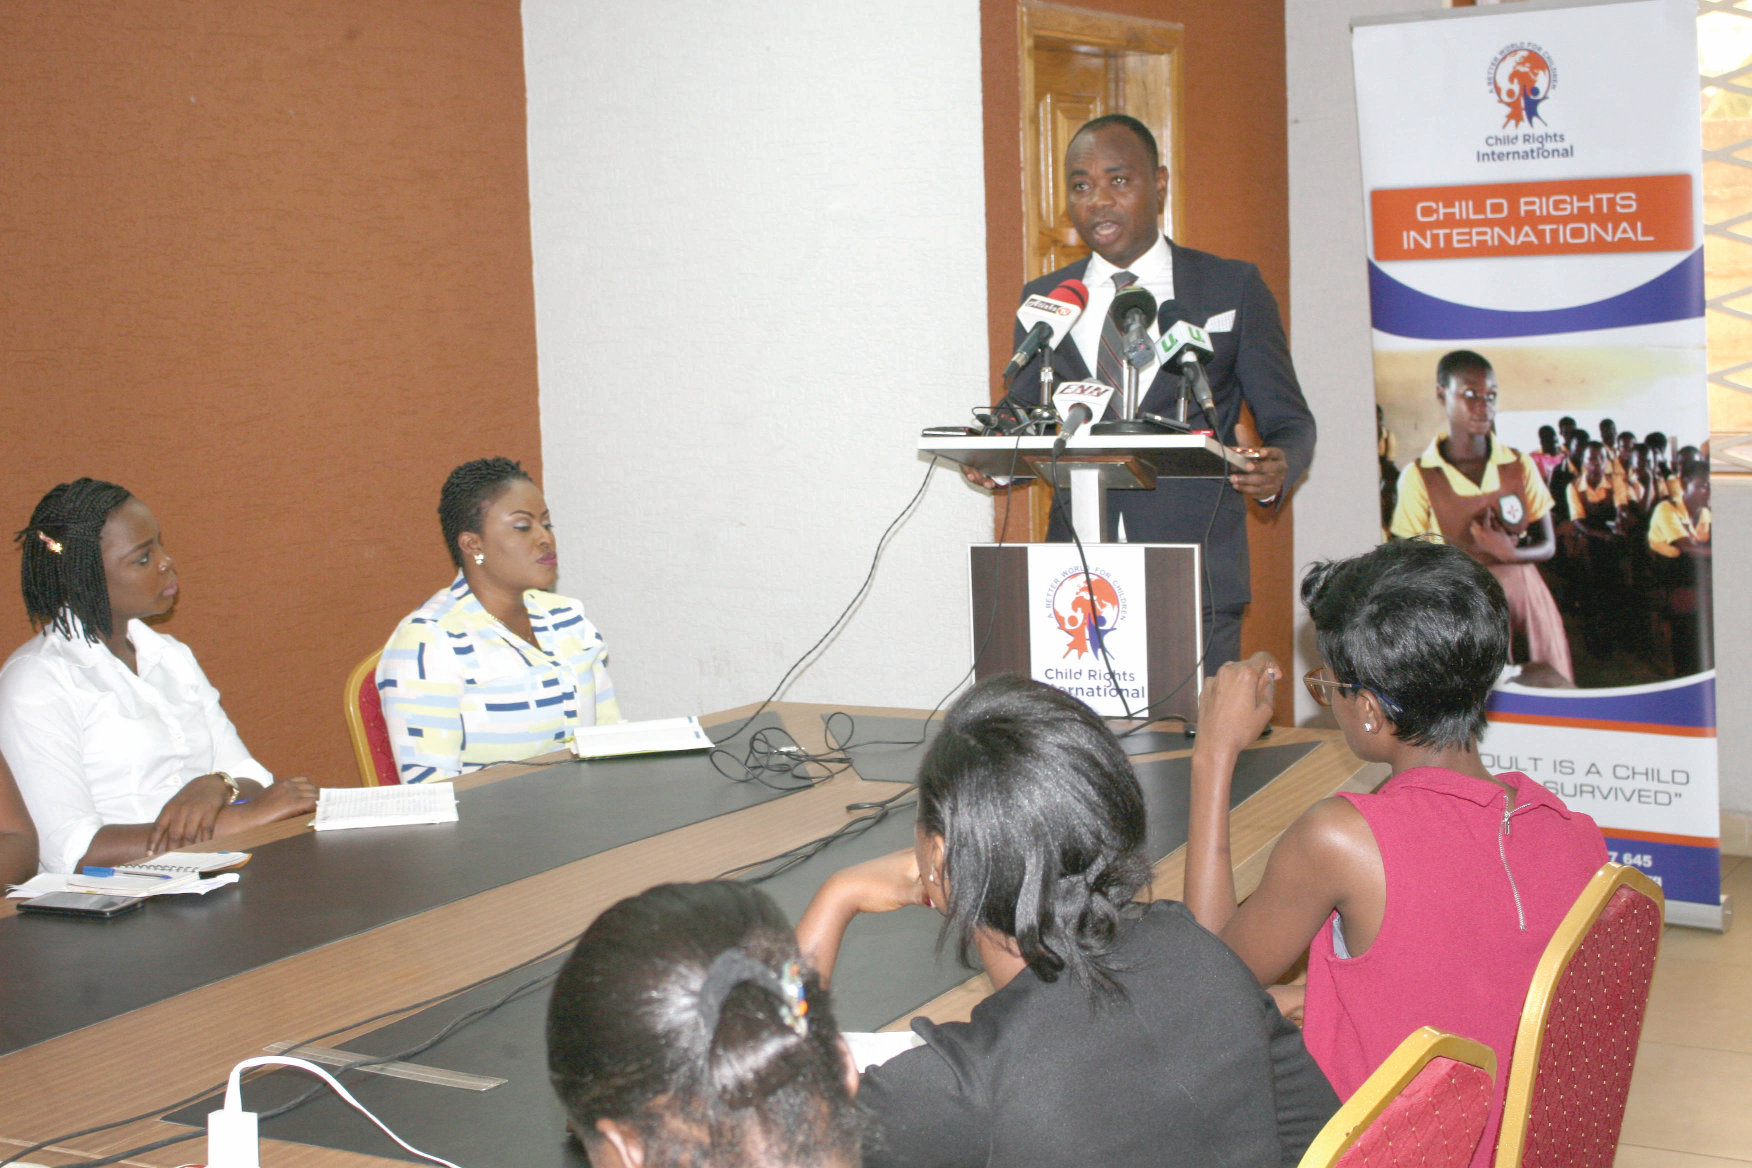 Mr Bright Appiah, Executive Director of Child Rights International, addressing the media.